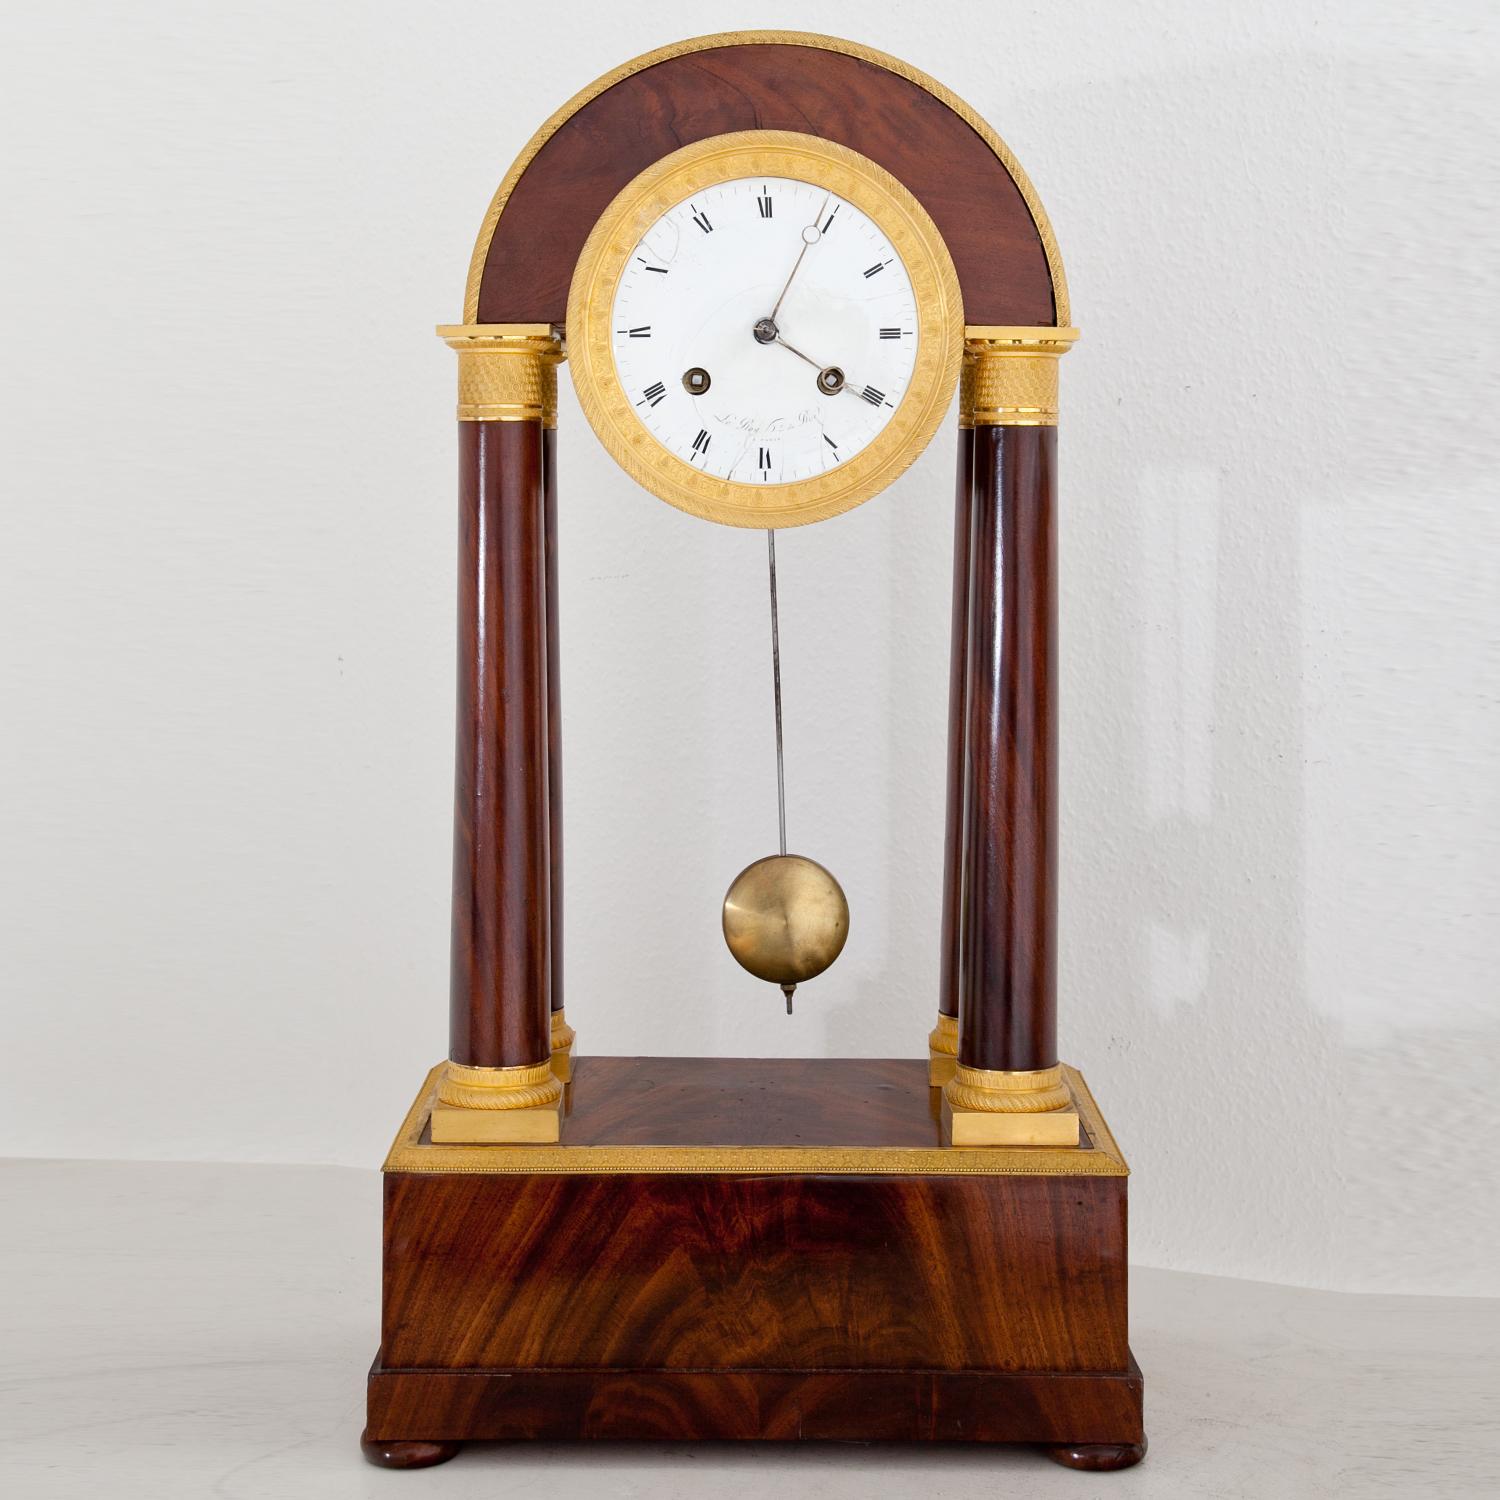 Mahogany-veneered Directoire portal clock, standing on a rectangular base. Four columns with gilt bases and capitals support the clockwork, which is housed in a cylindric brass case. The molding and the ring around the enamel clockface is gilt as